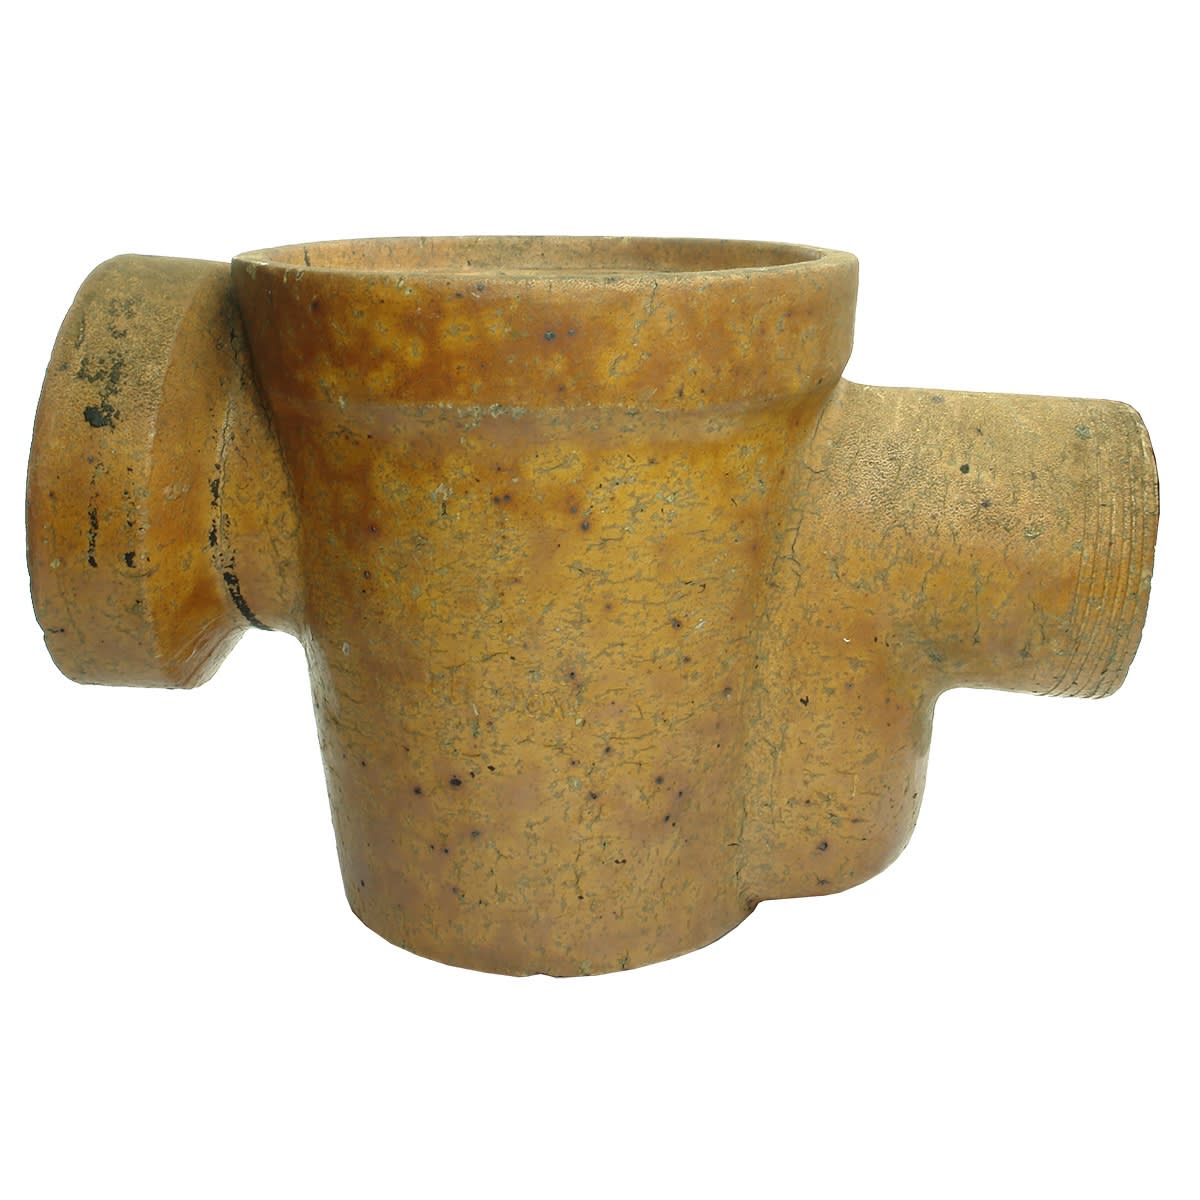 Large Earthenware Gully Trap or similar. Stamp: Large Kangaroo / Lithgow. (Lithgow Pottery. New South Wales)